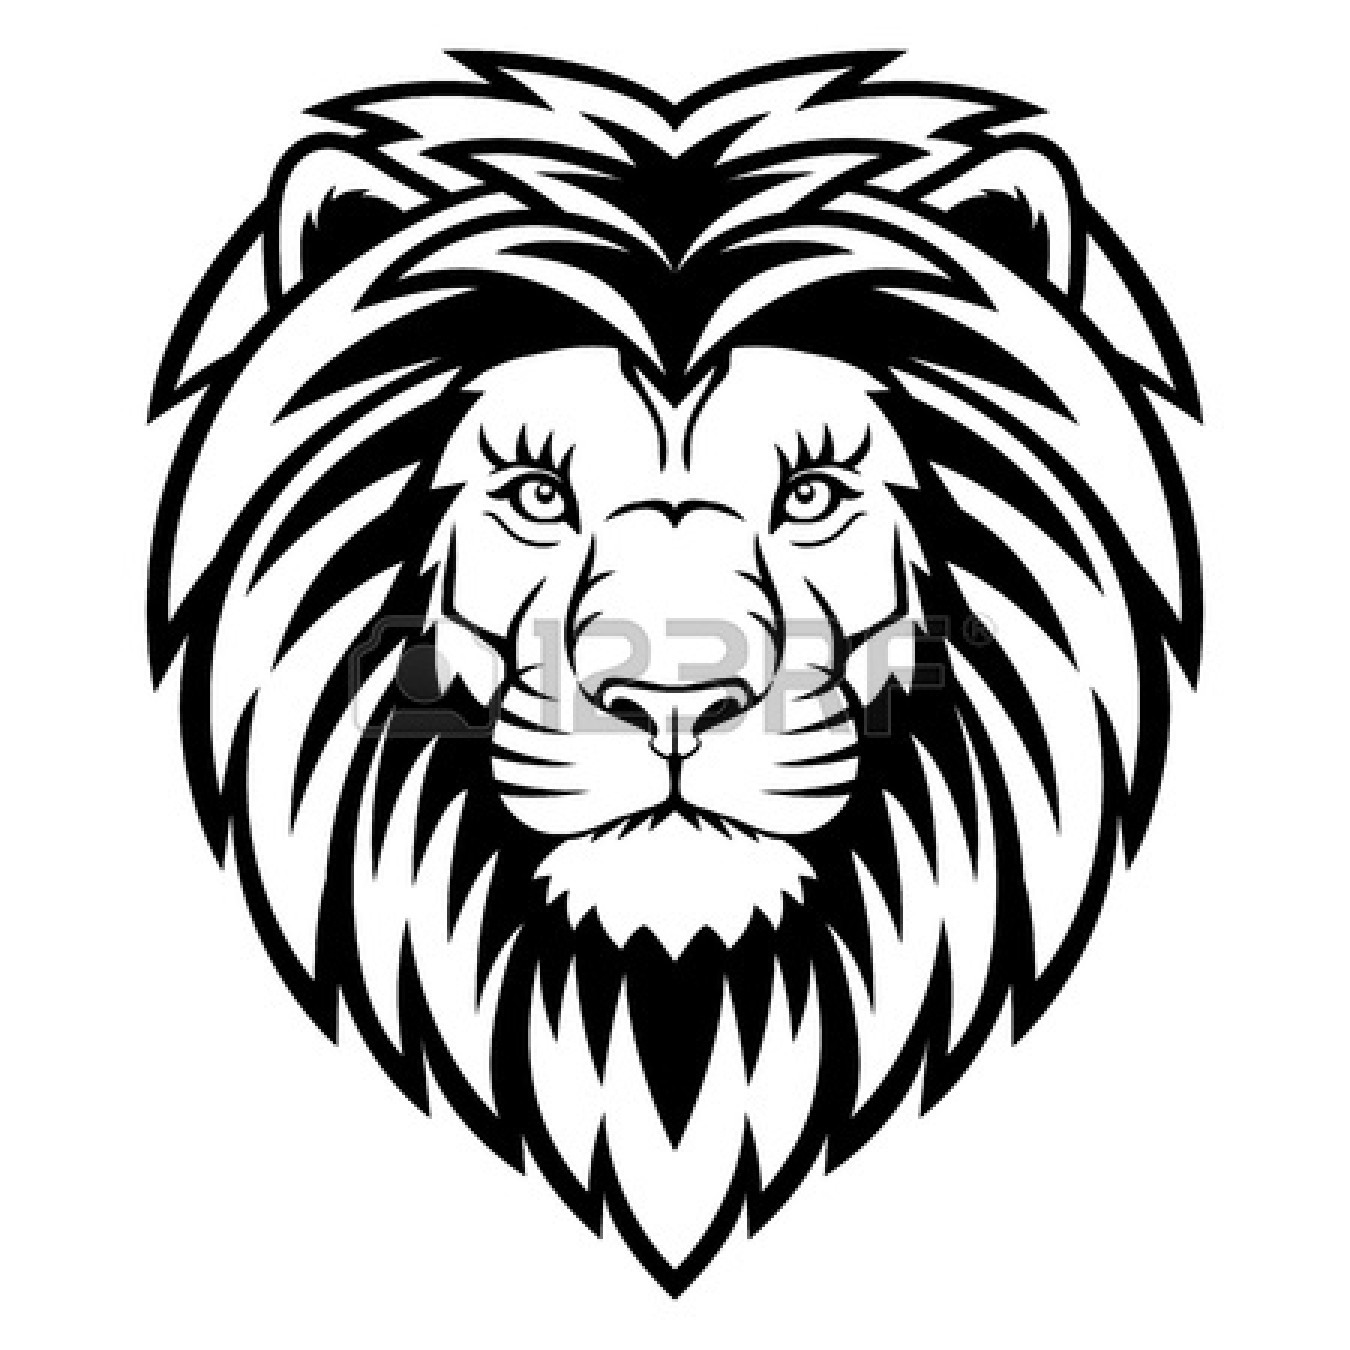 Roaring Lion Clipart Black And White | Clipart Panda - Free ...